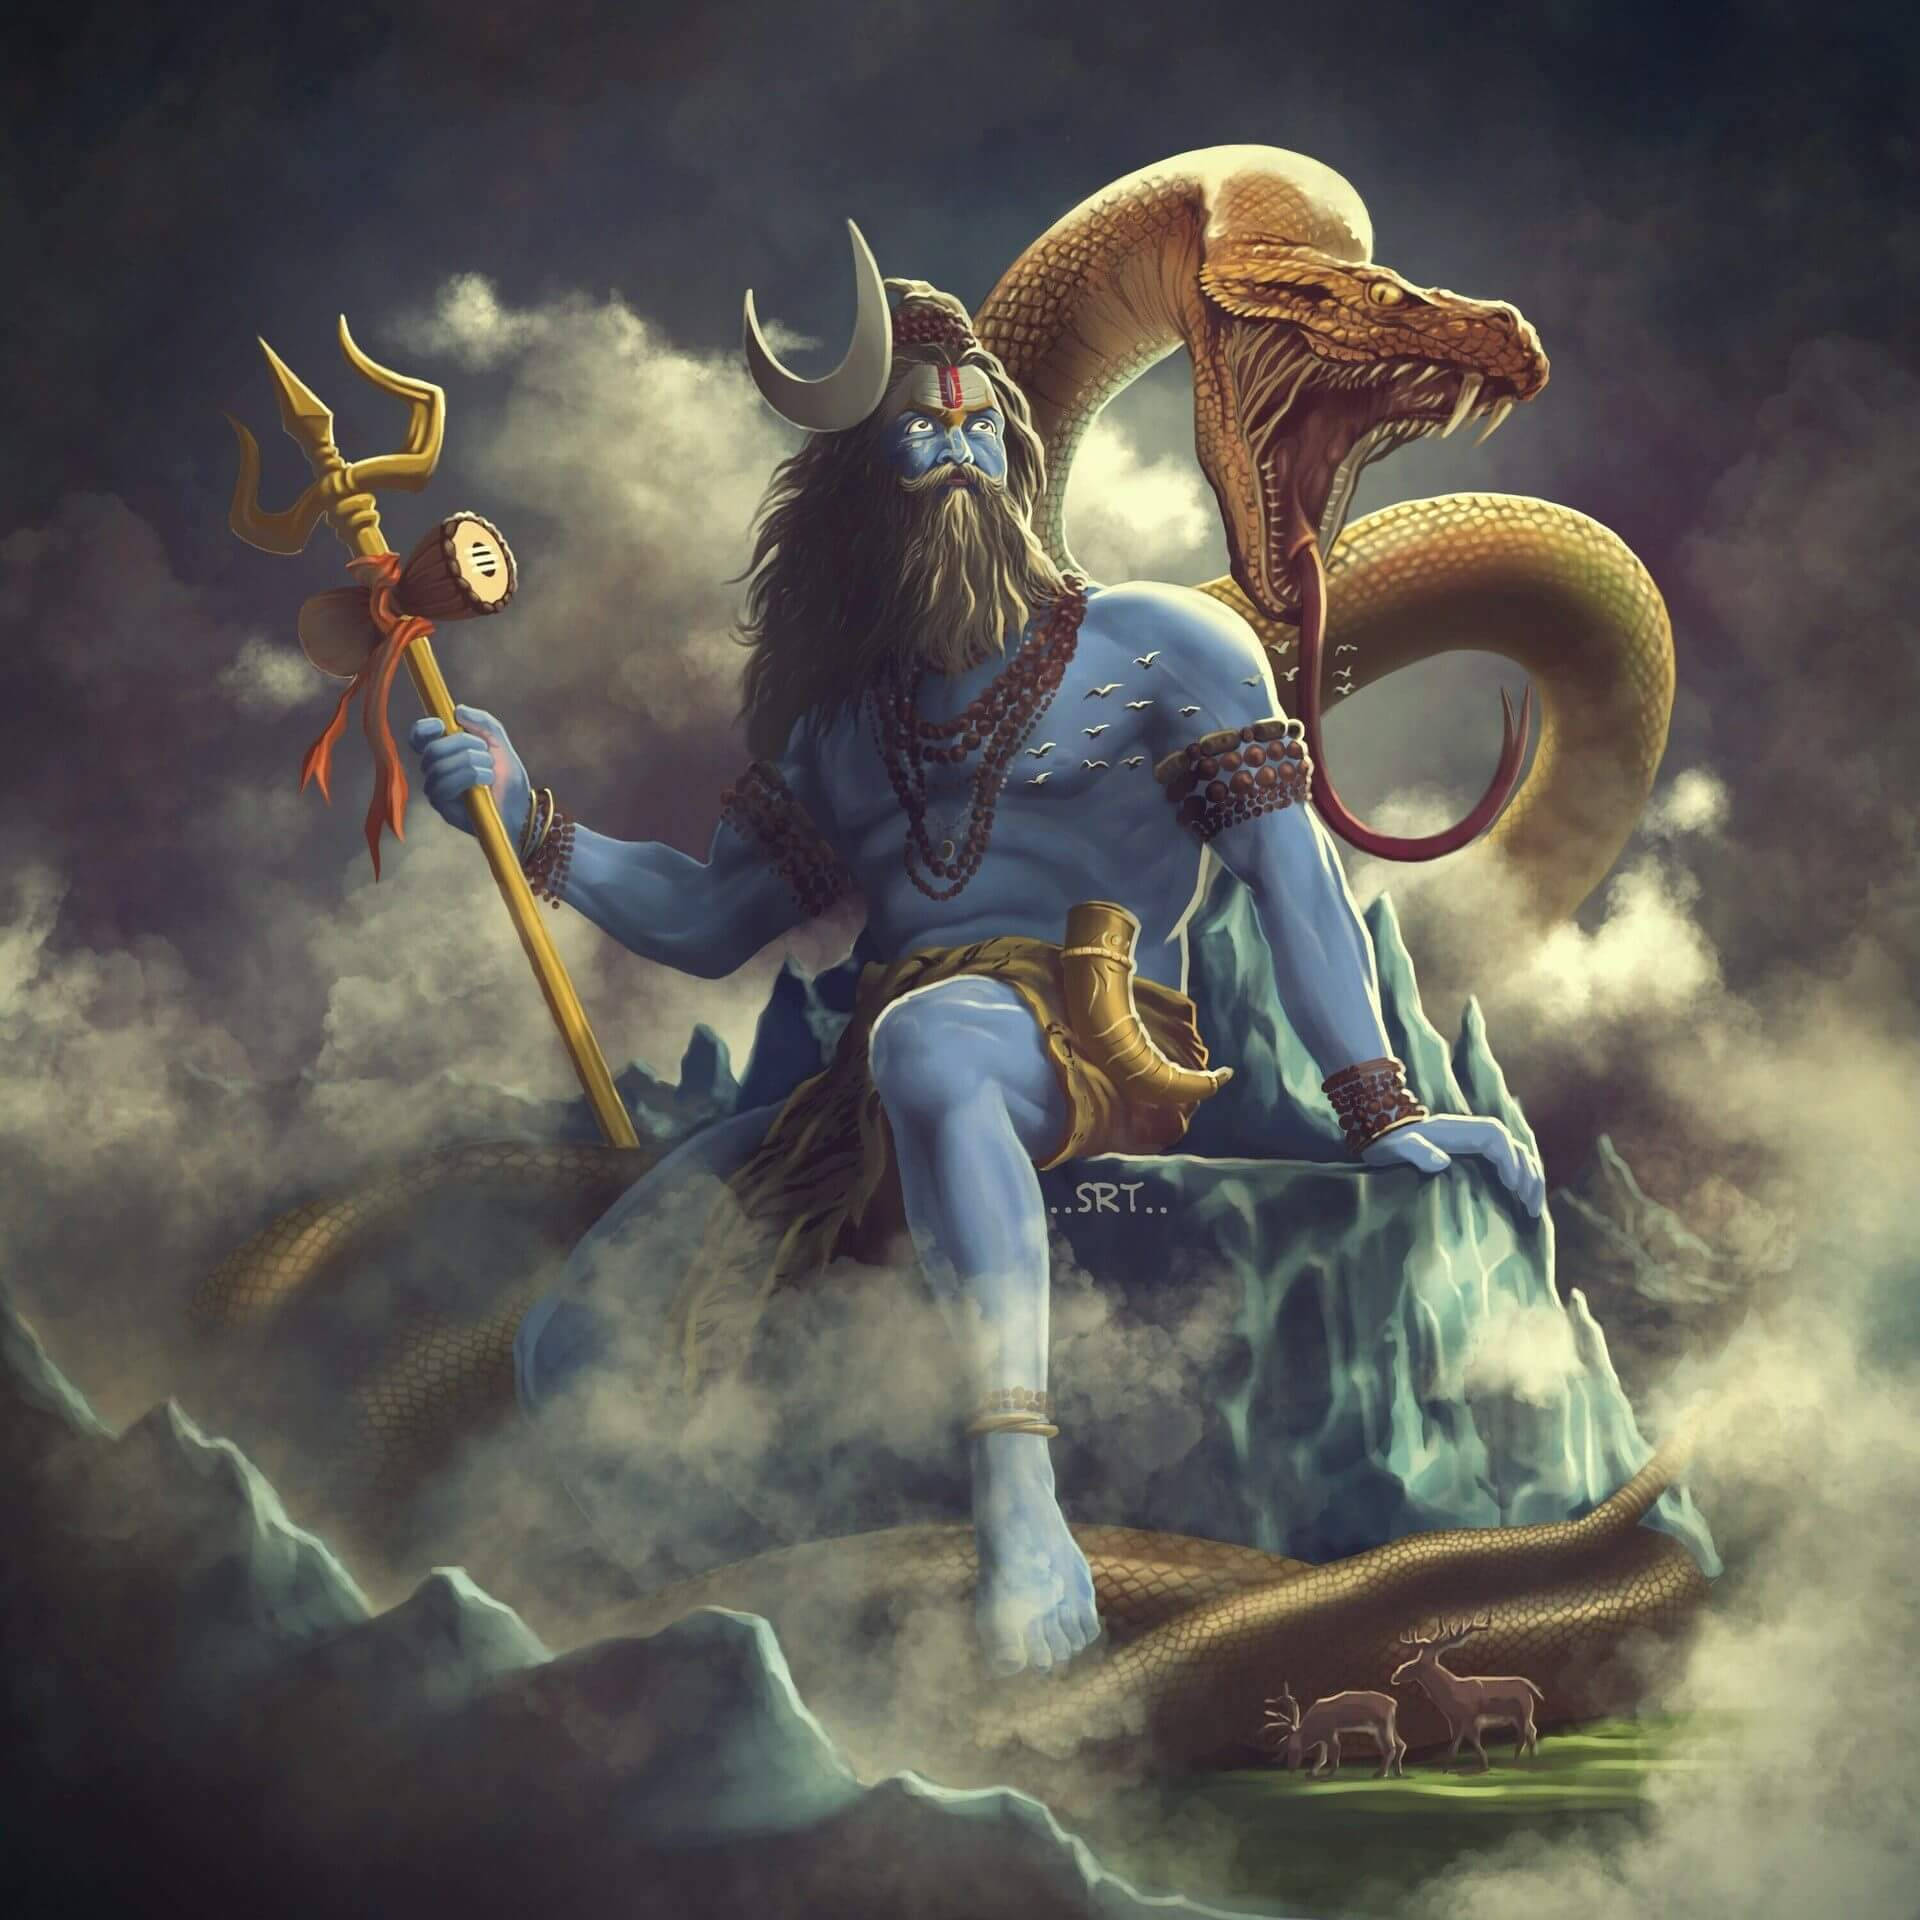 Mighty Lord Shiva Background